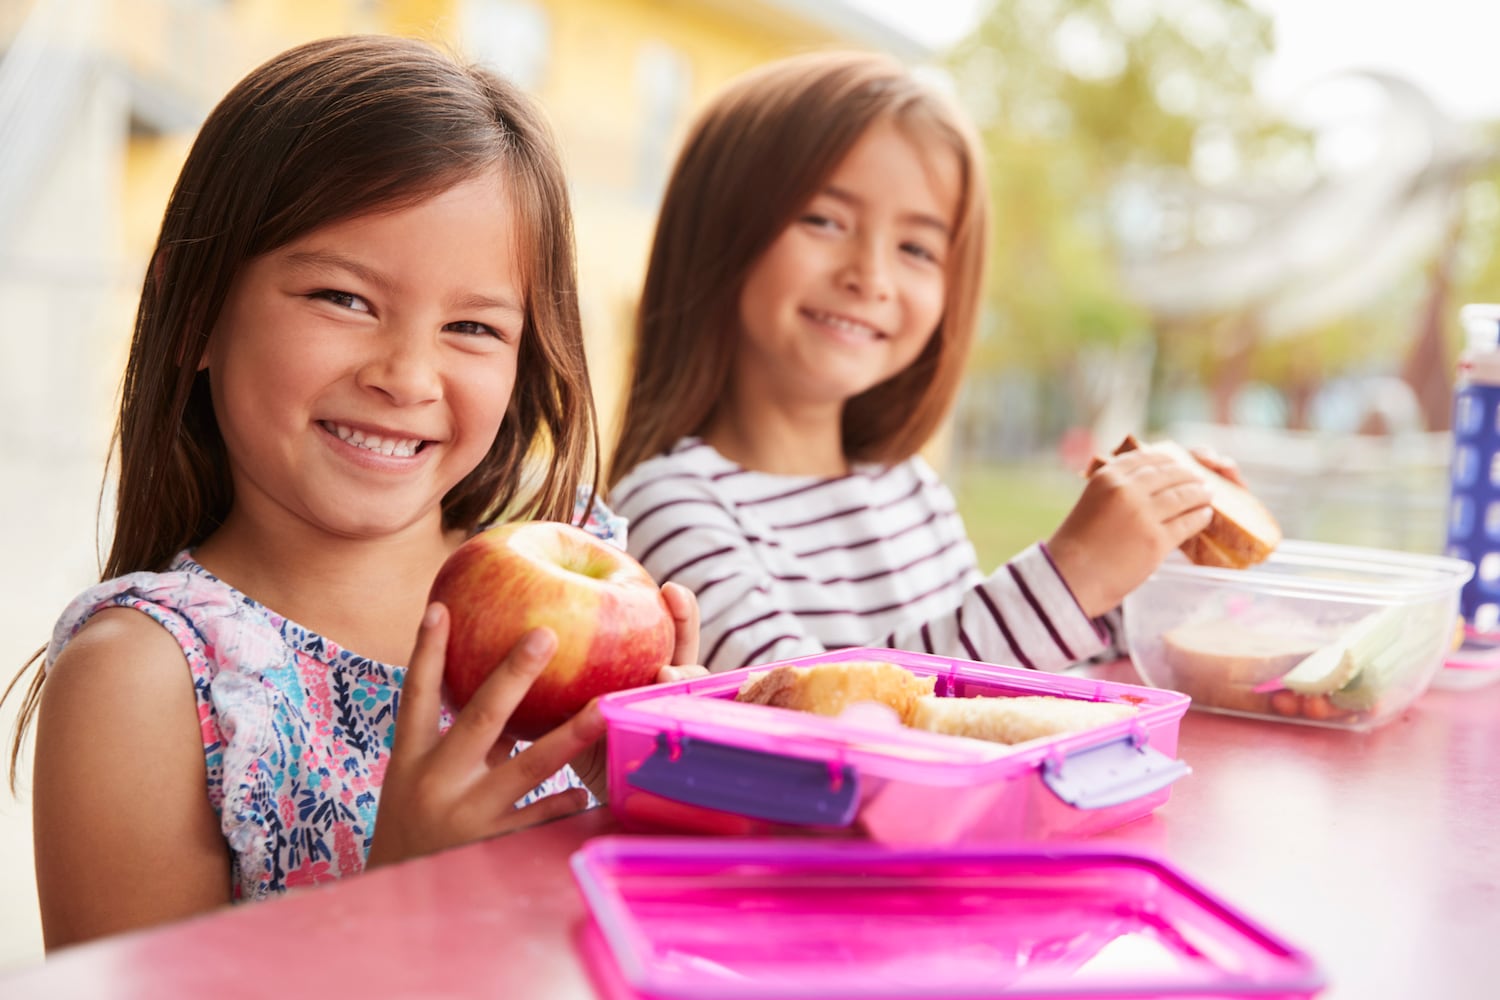 Get snack-savvy with these easy after-school snack ideas